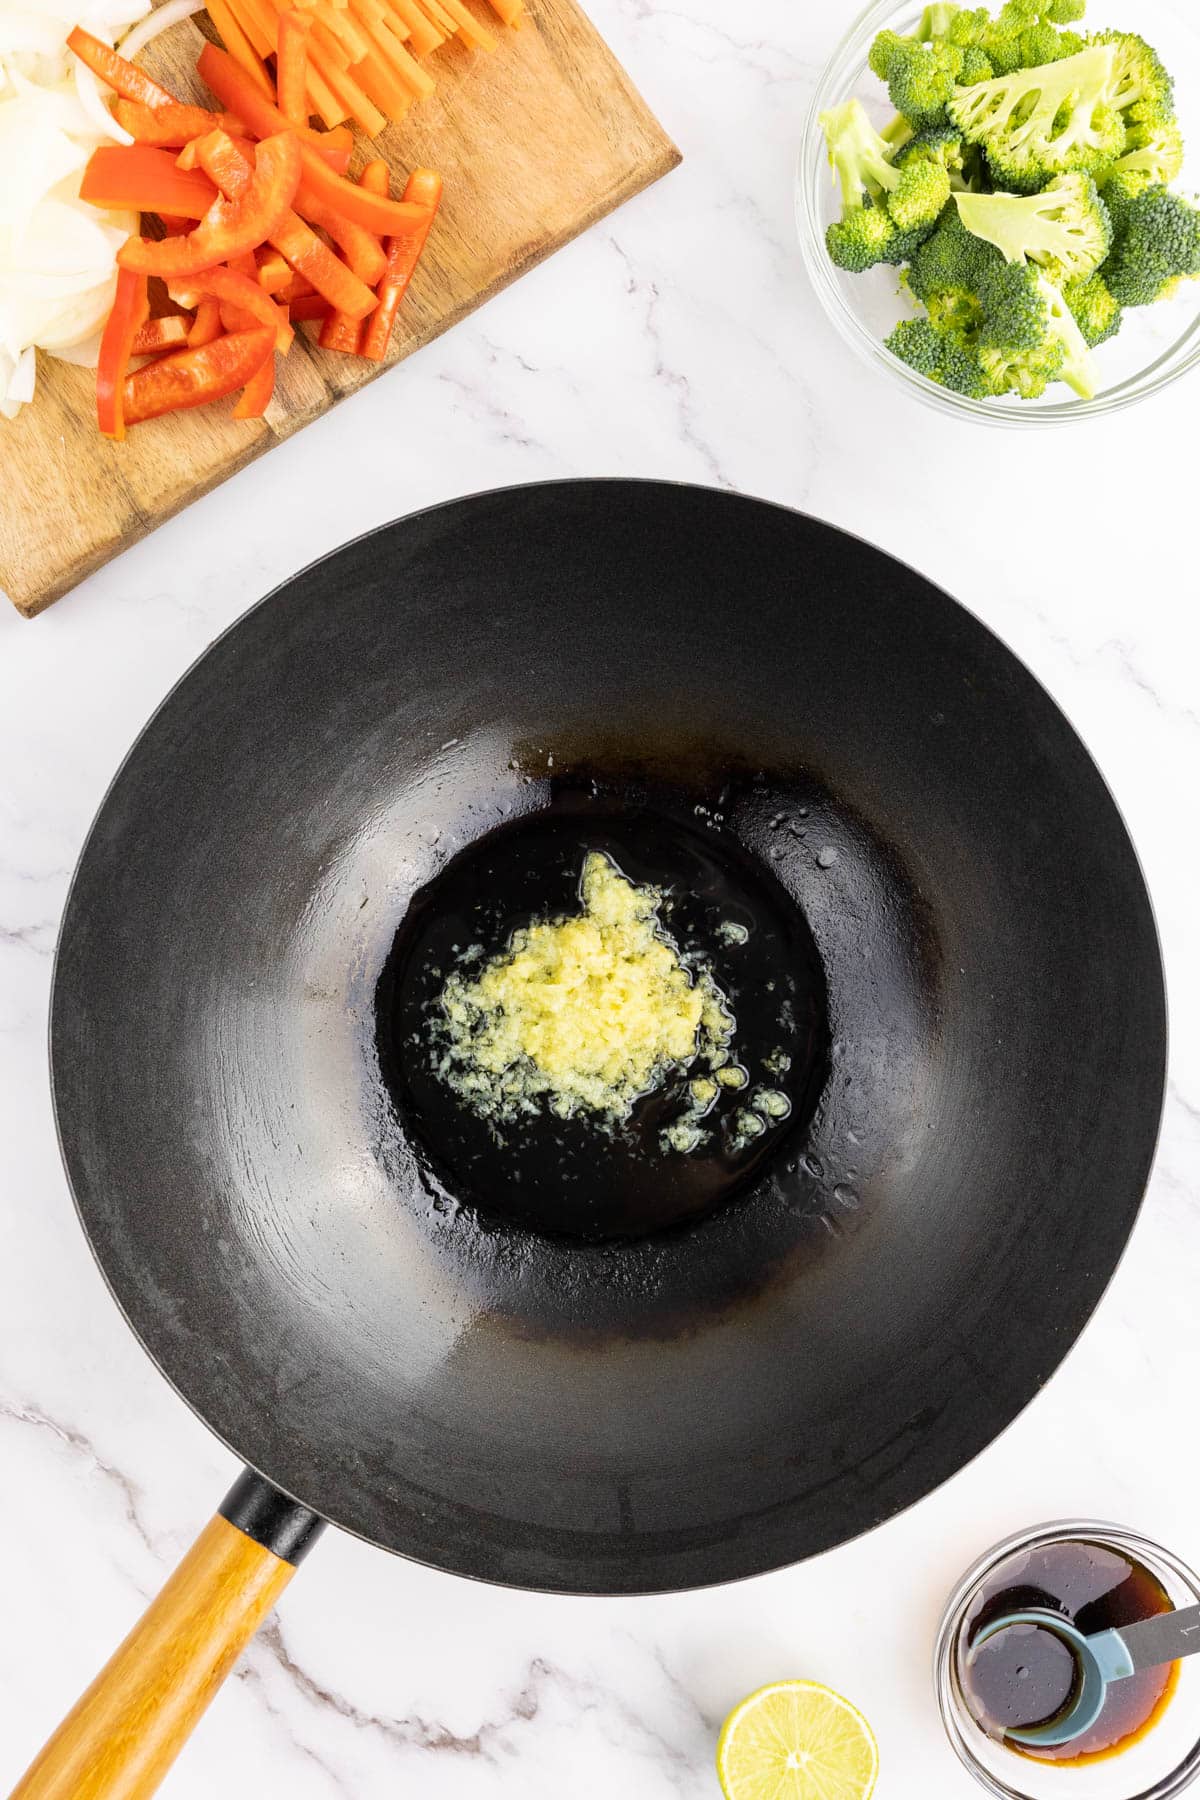 Sautéing garlic and ginger in a wok with oil